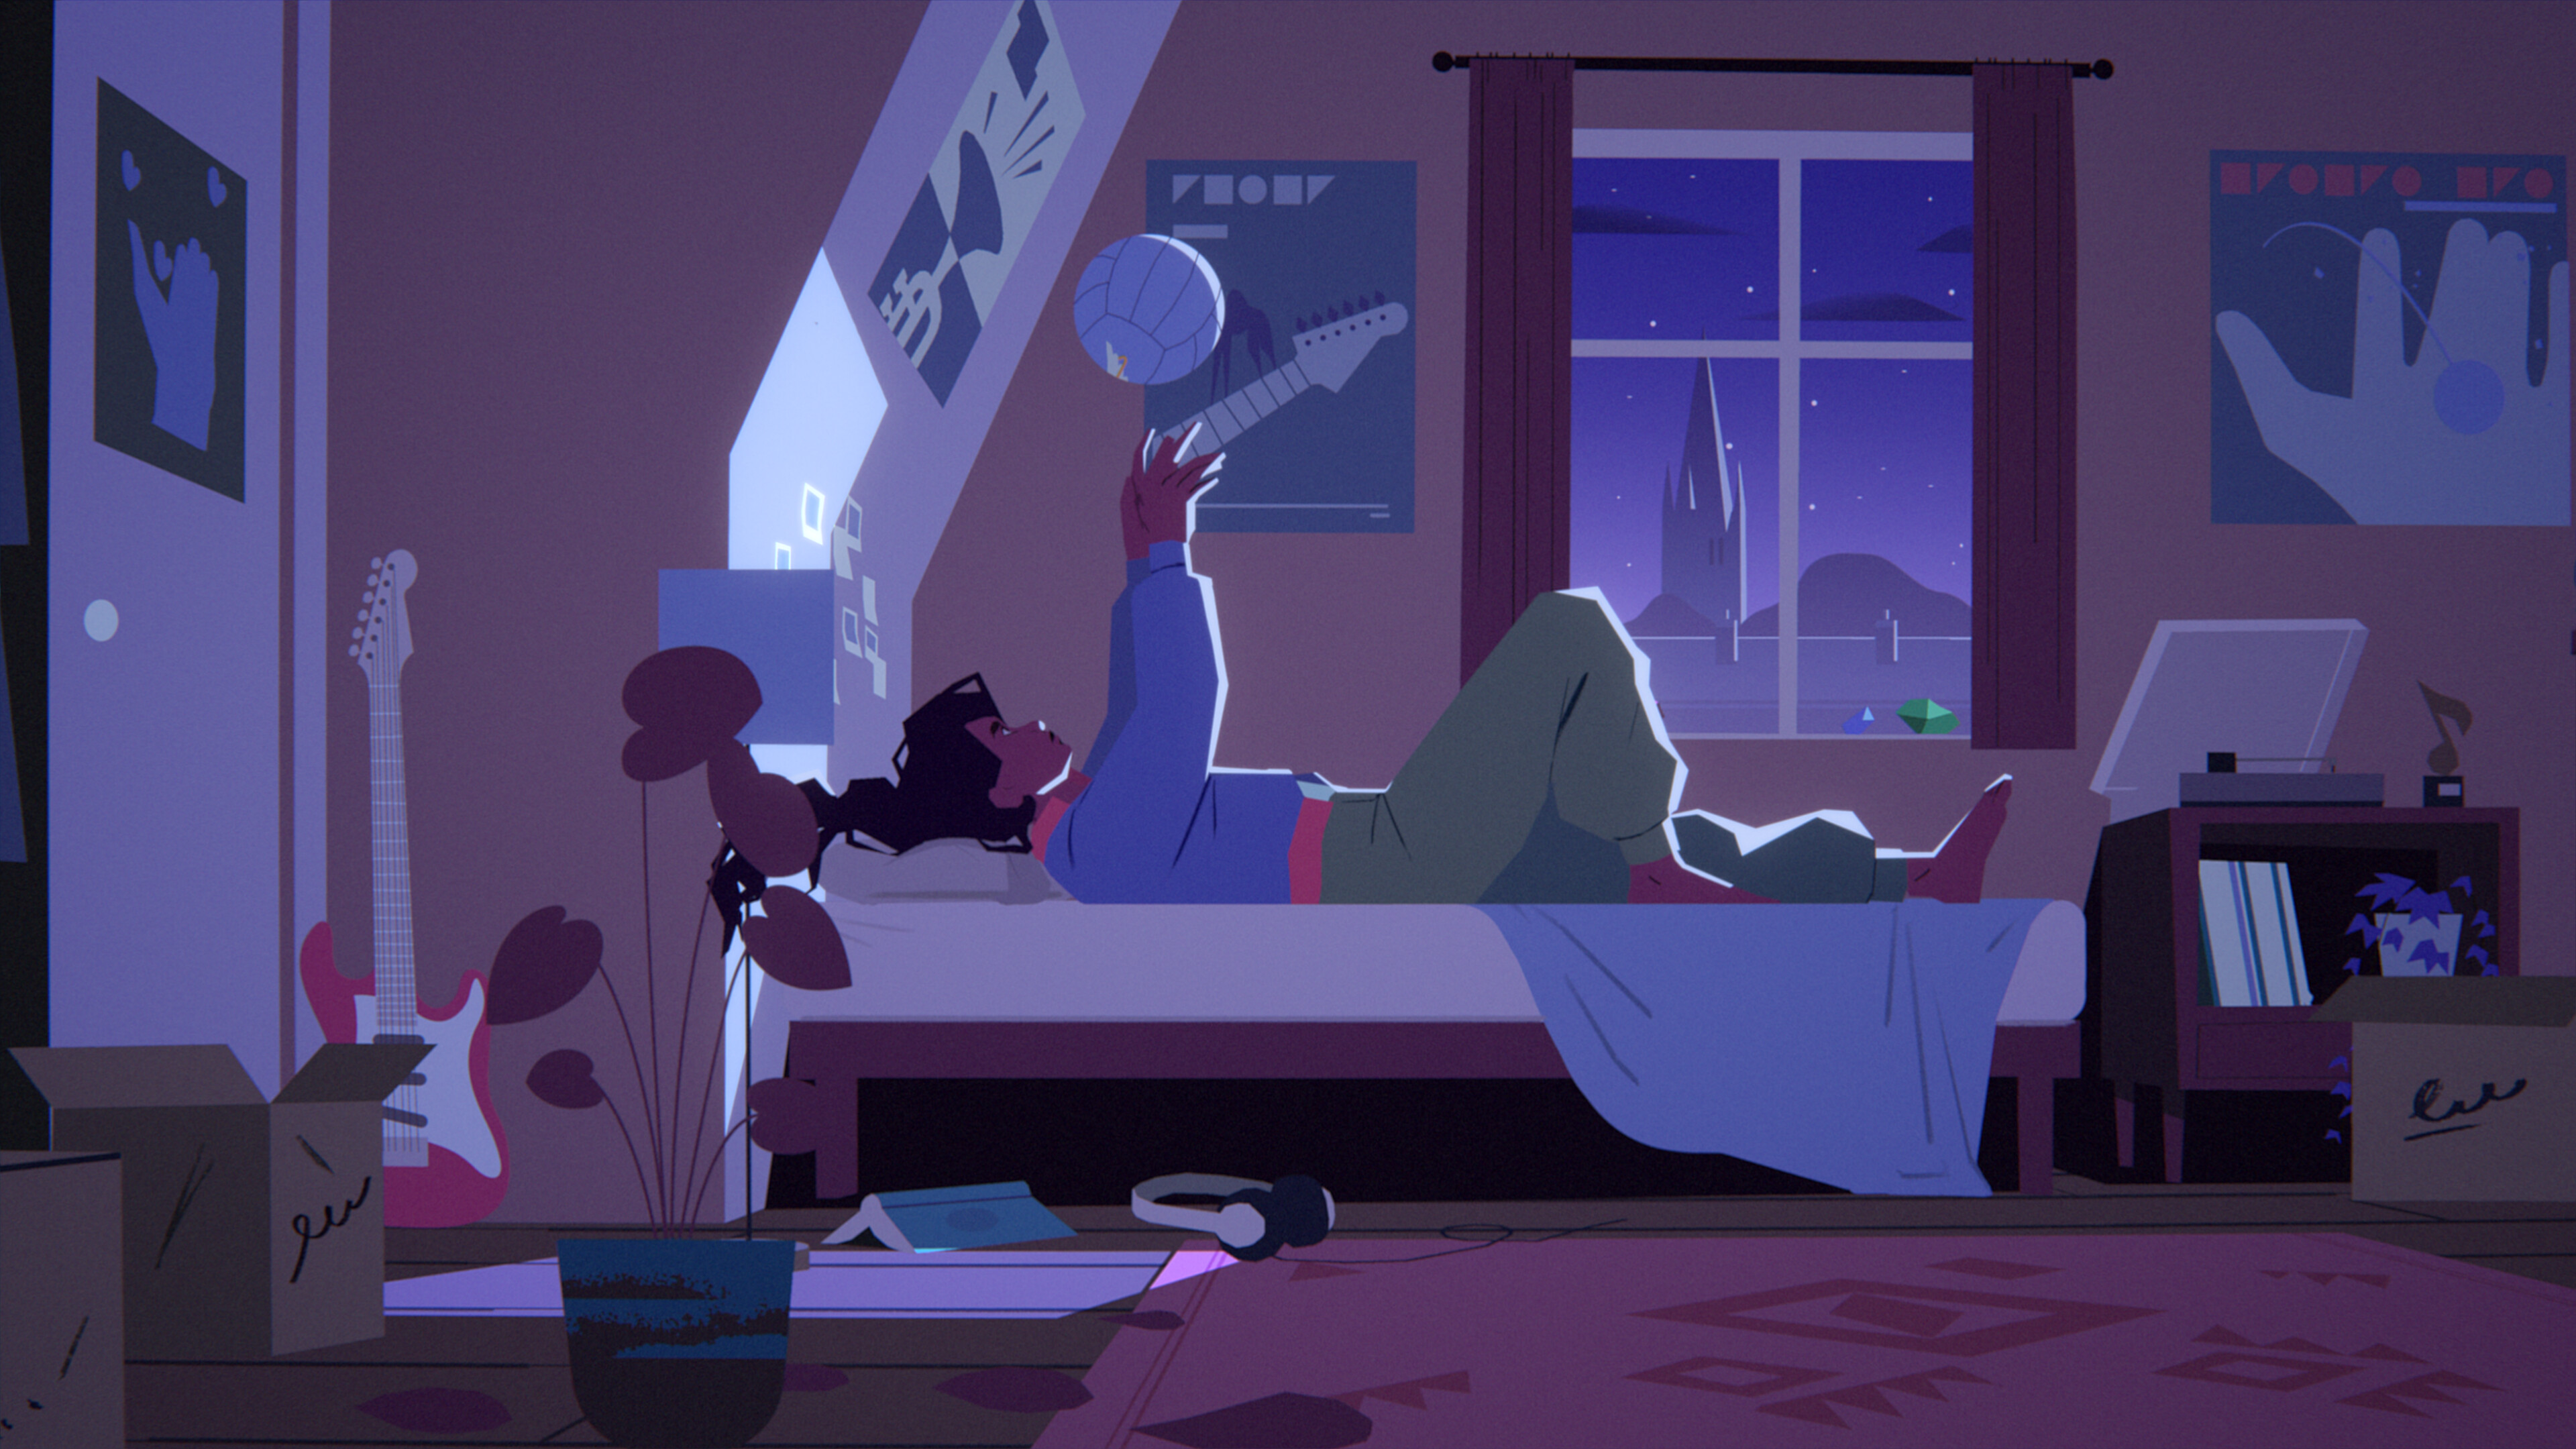 Desta plays with a ball while lying on her bed in thought in Desta: The Memories Between.